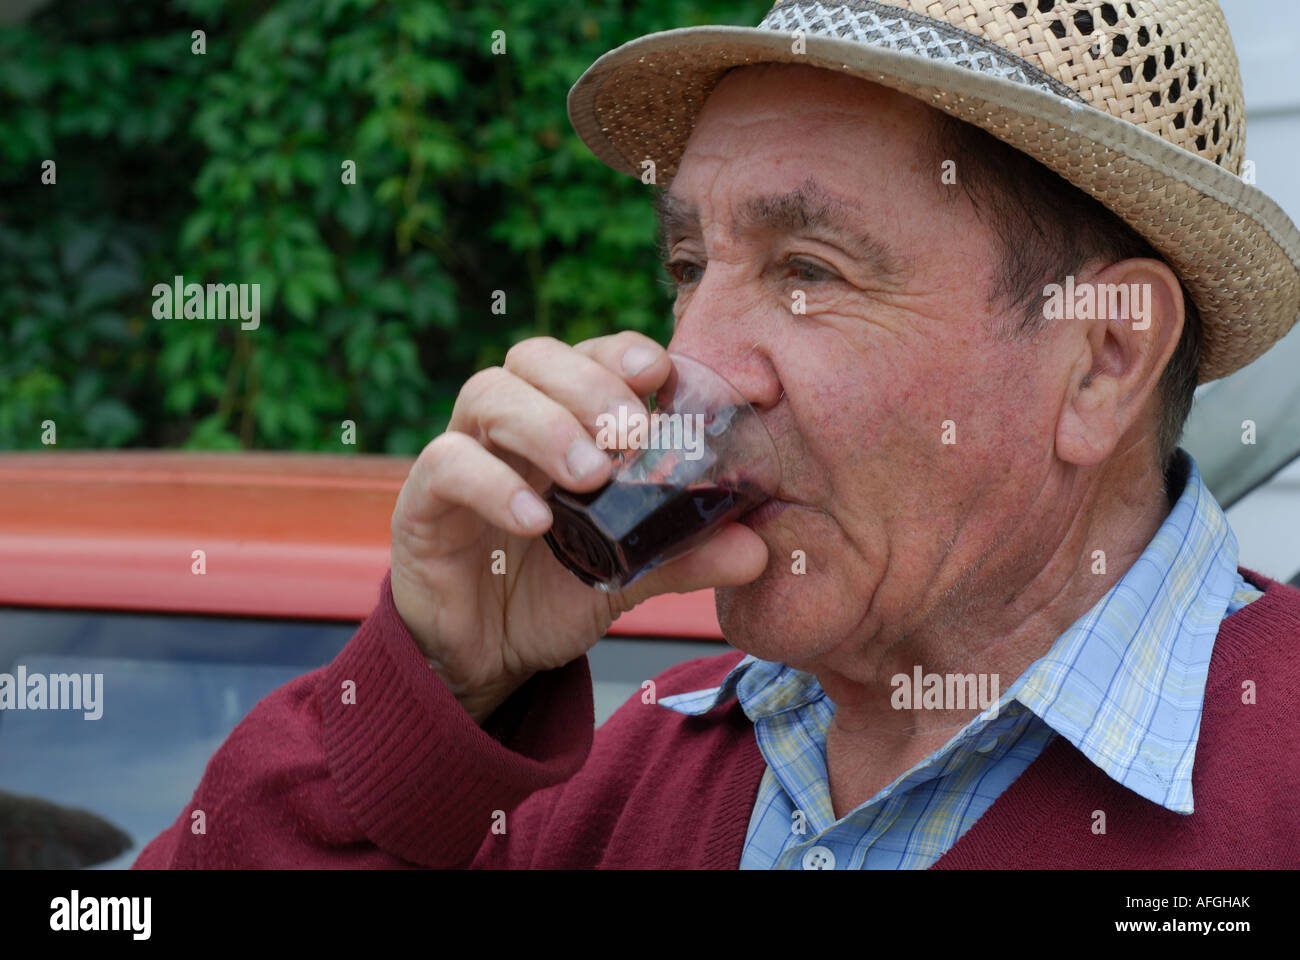 Frenchman drinking red wine. Stock Photo